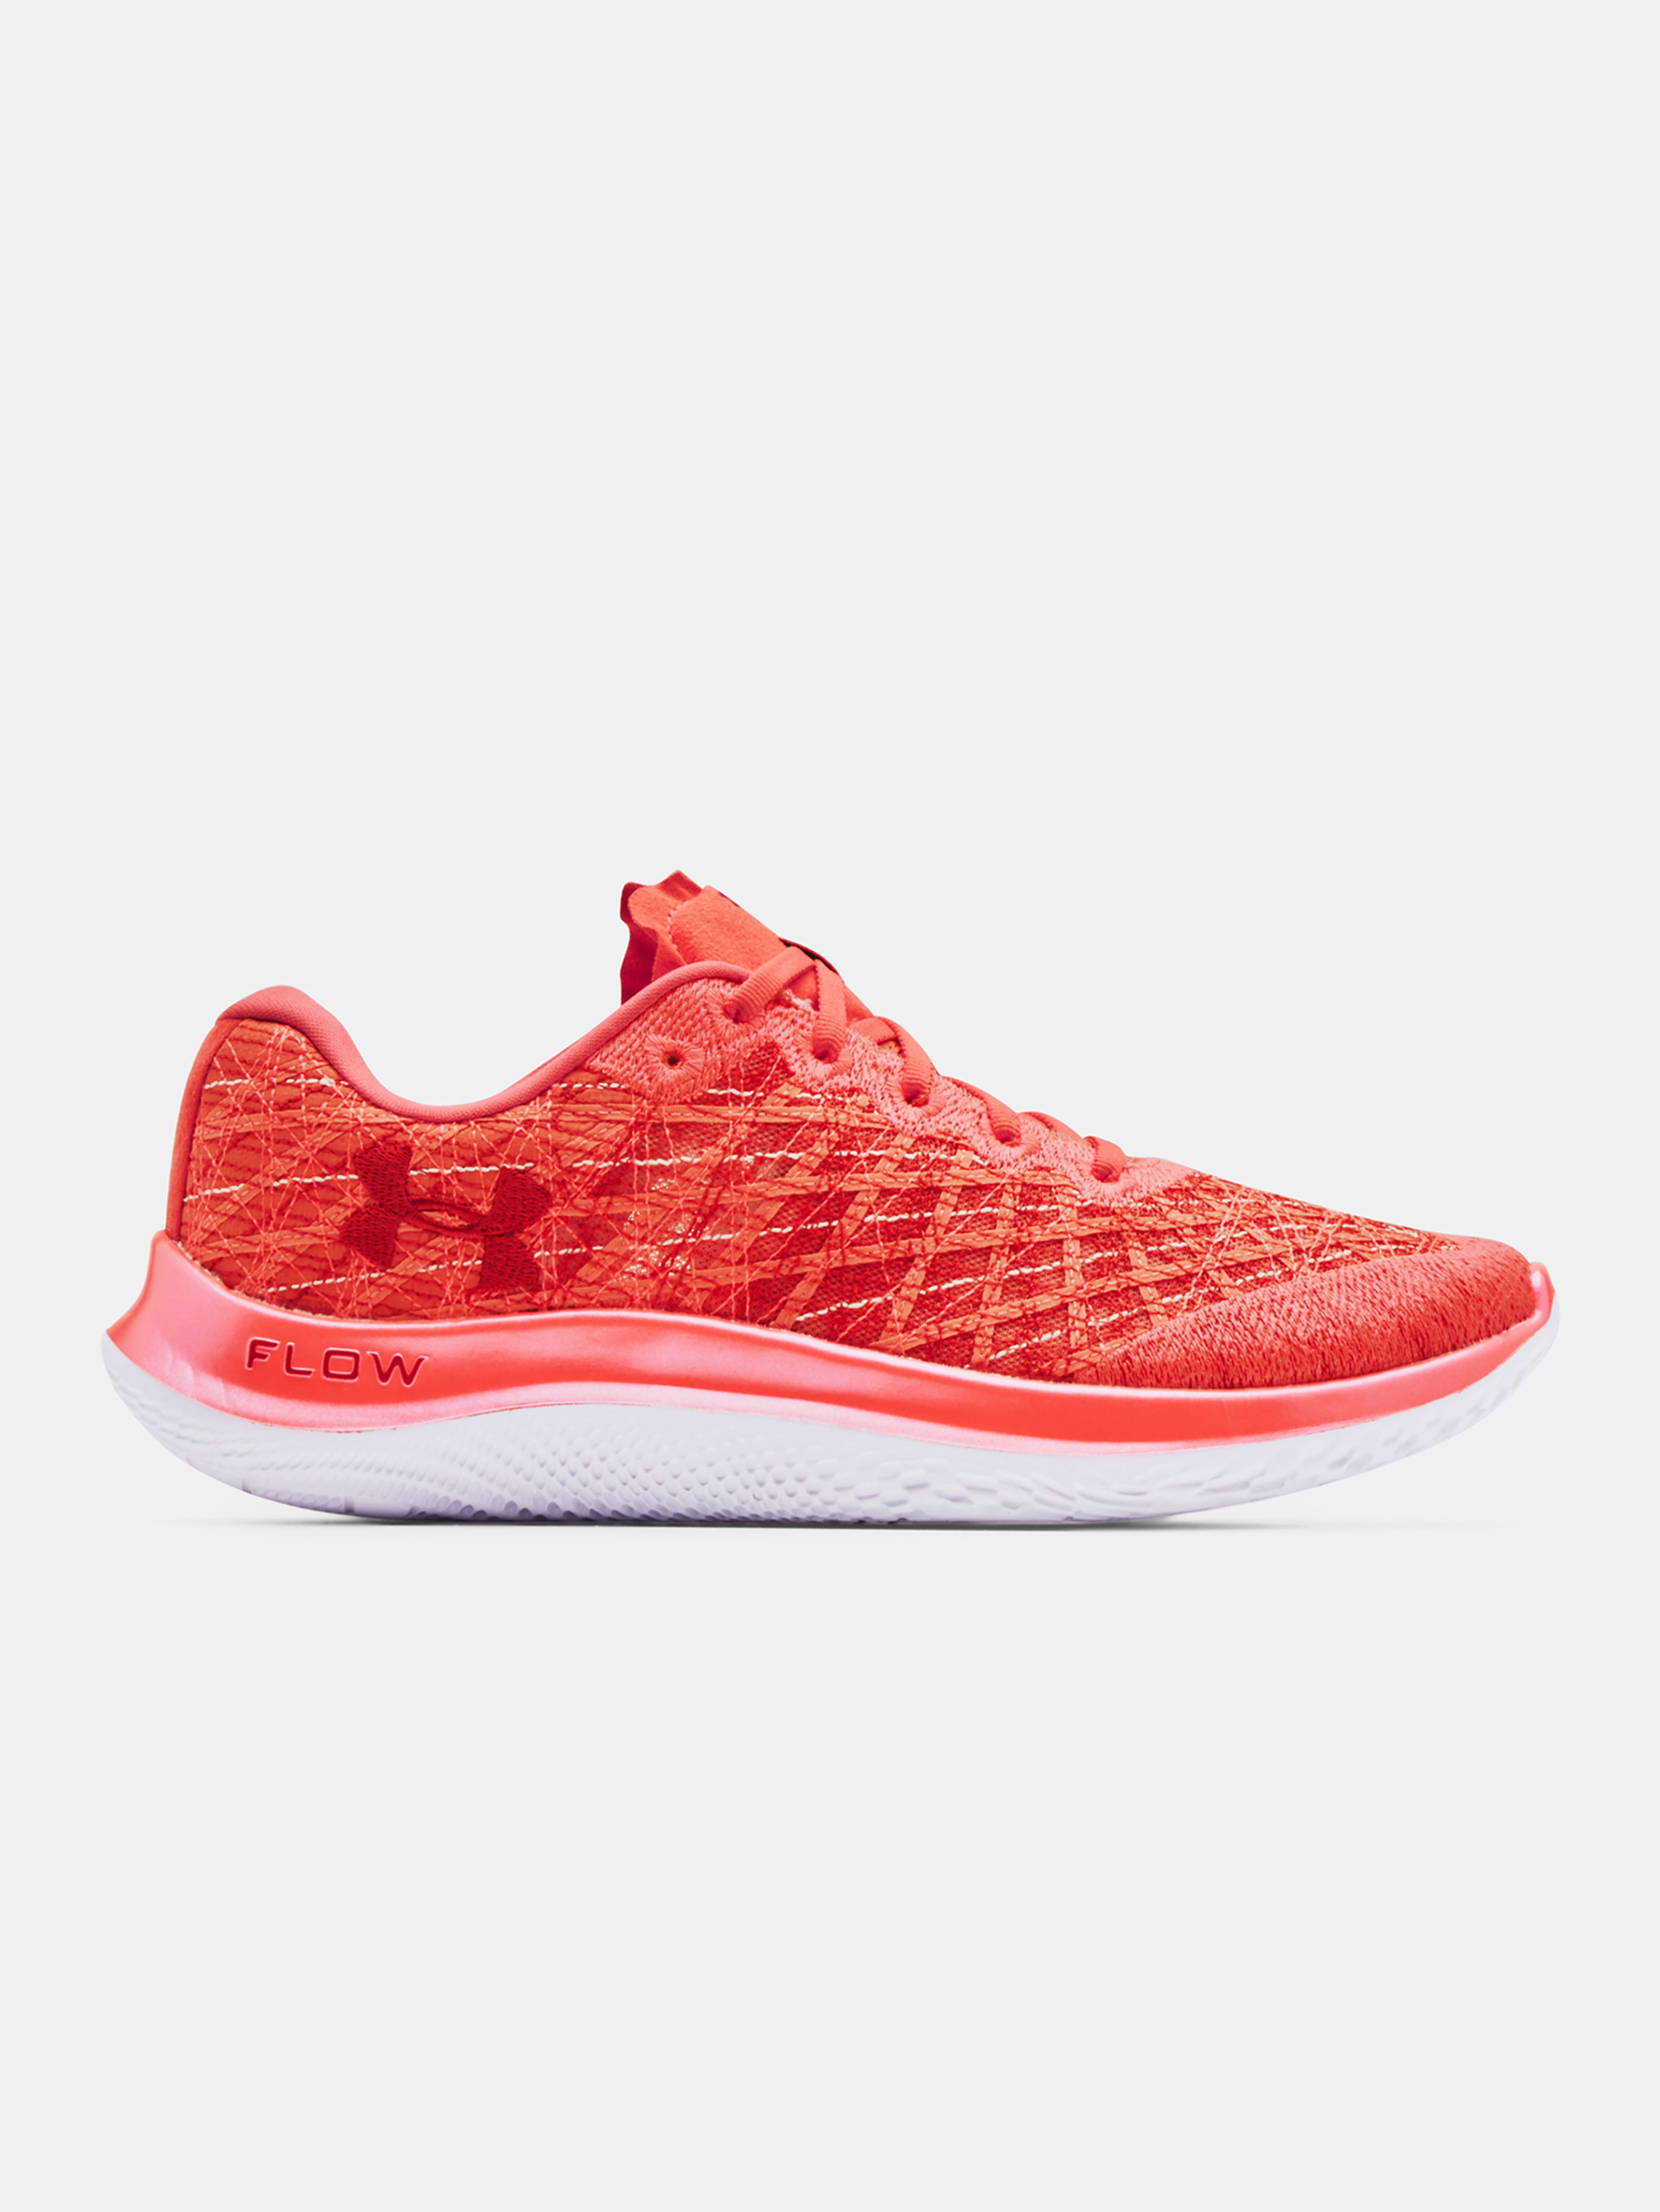 Boty Under Armour FLOW Velociti Wind-RED